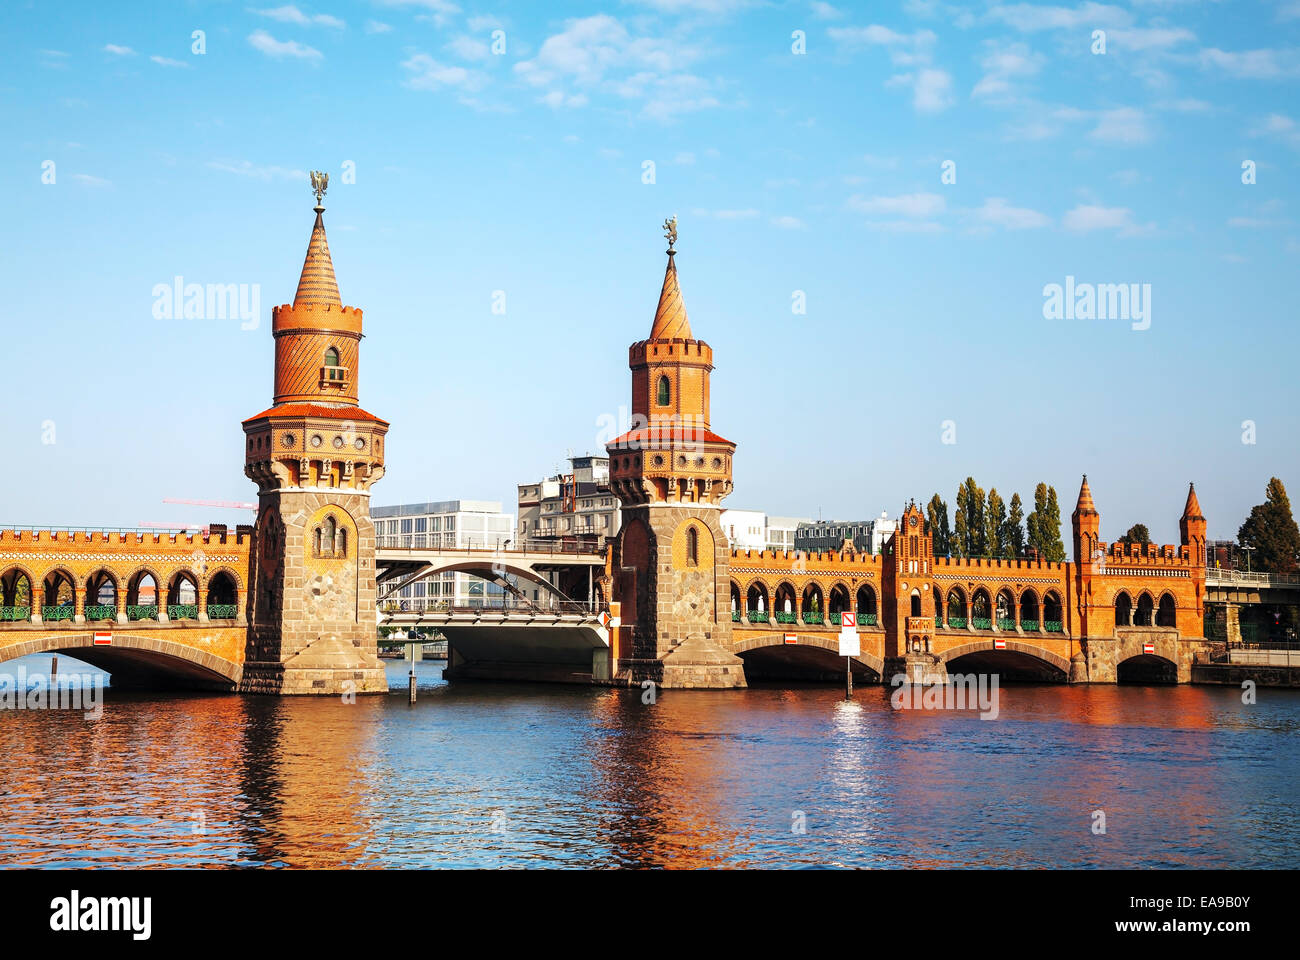 Oberbaum bridge in Berlin, Germany on a sunny day Stock Photo